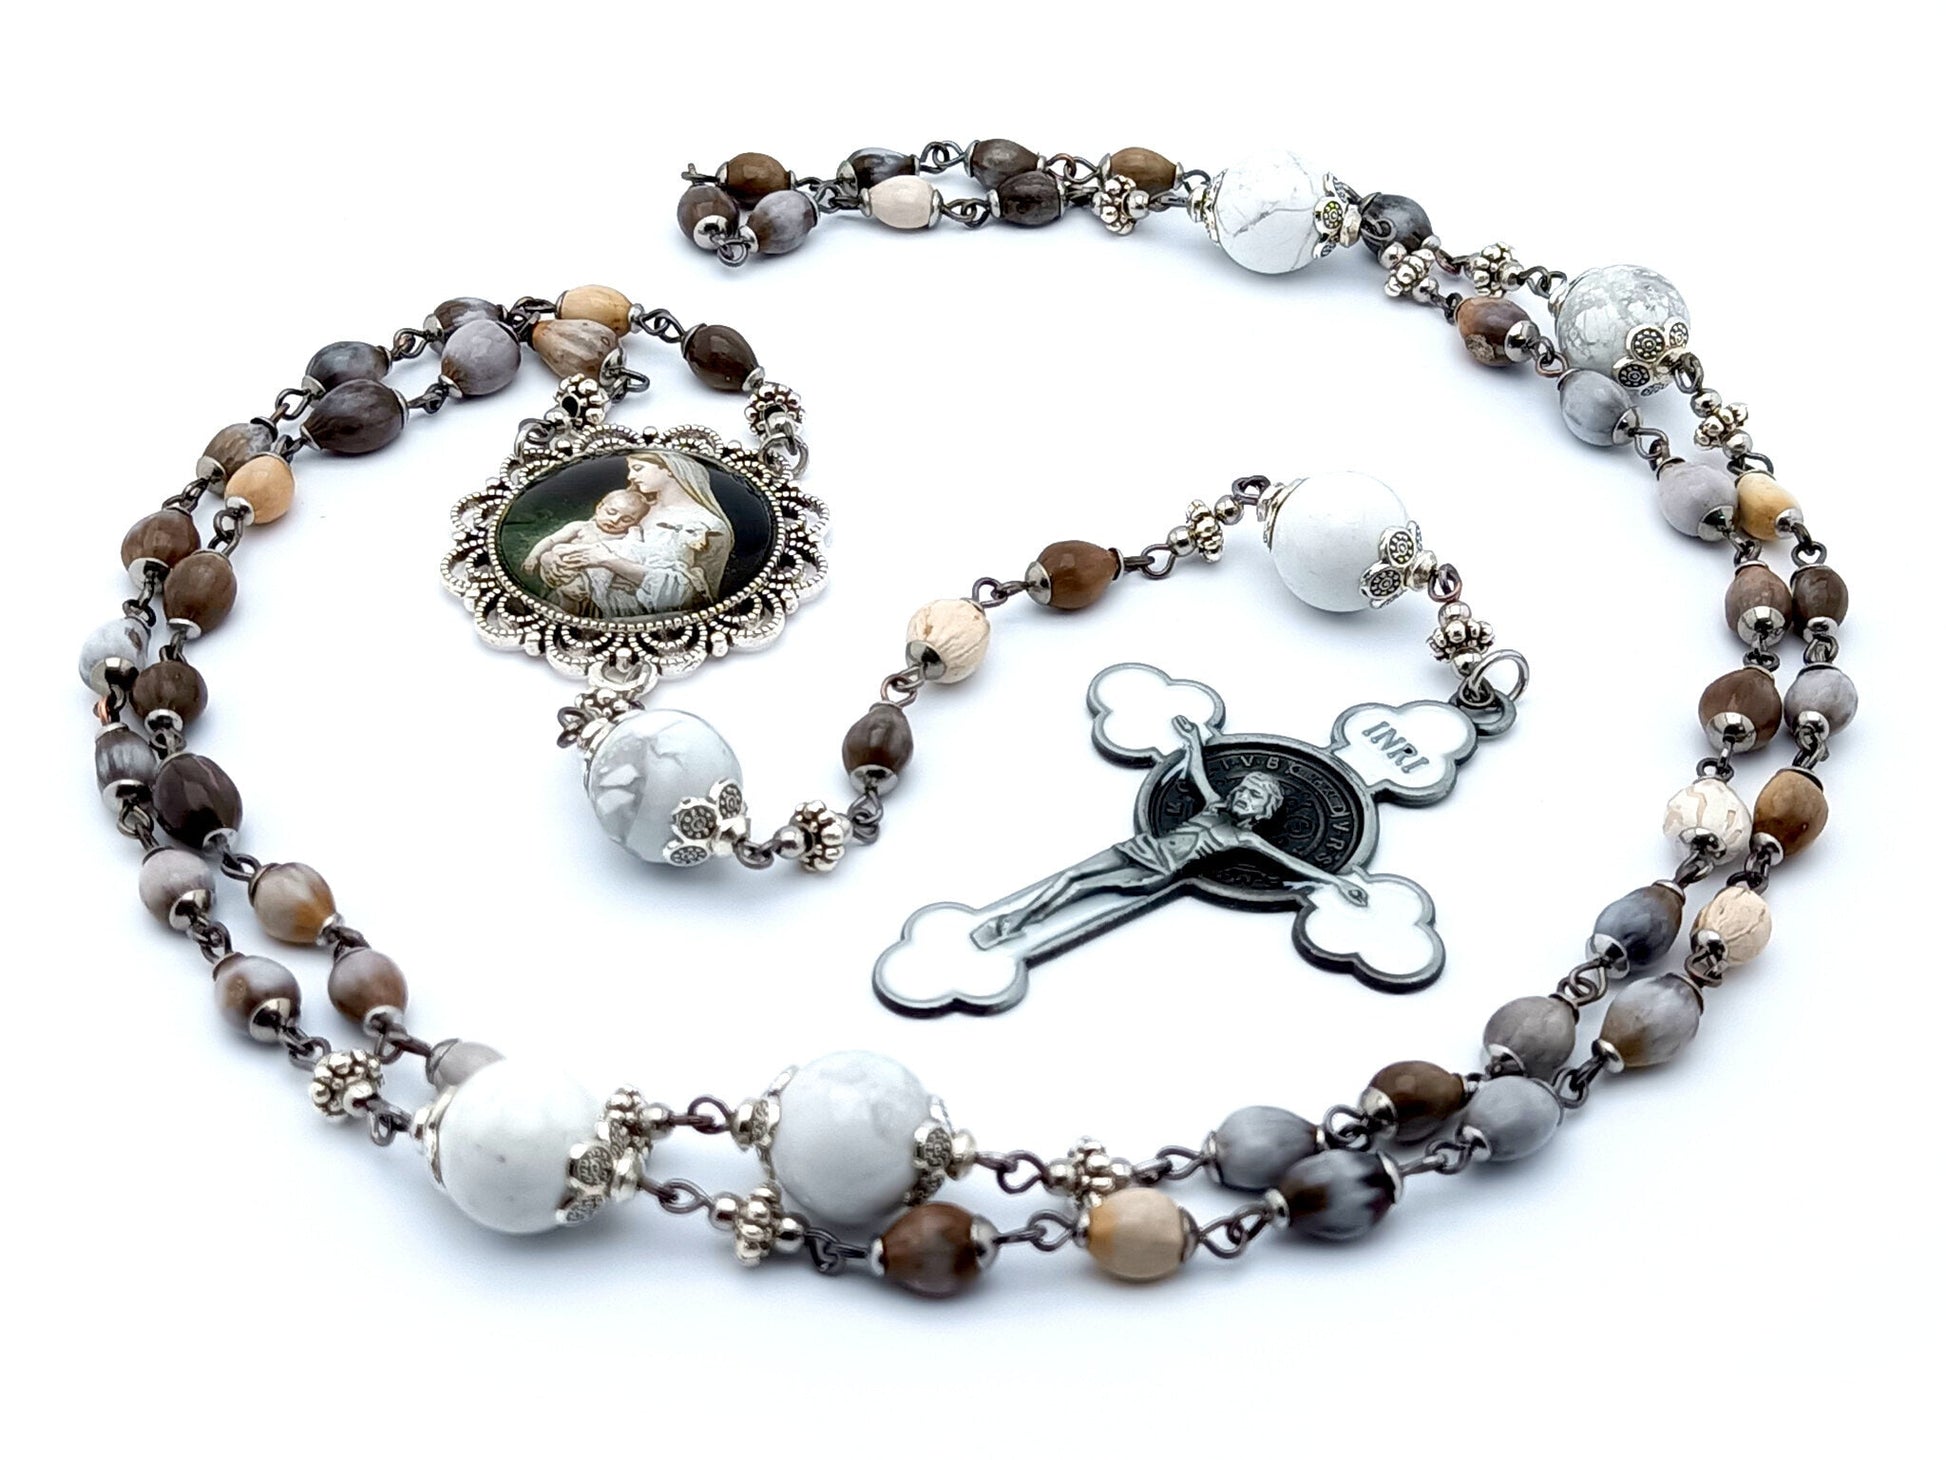 Virgin Mary and child unique rosary beads with jobs tears and gemstone beads, white enamel crucifix and centre picture medal.